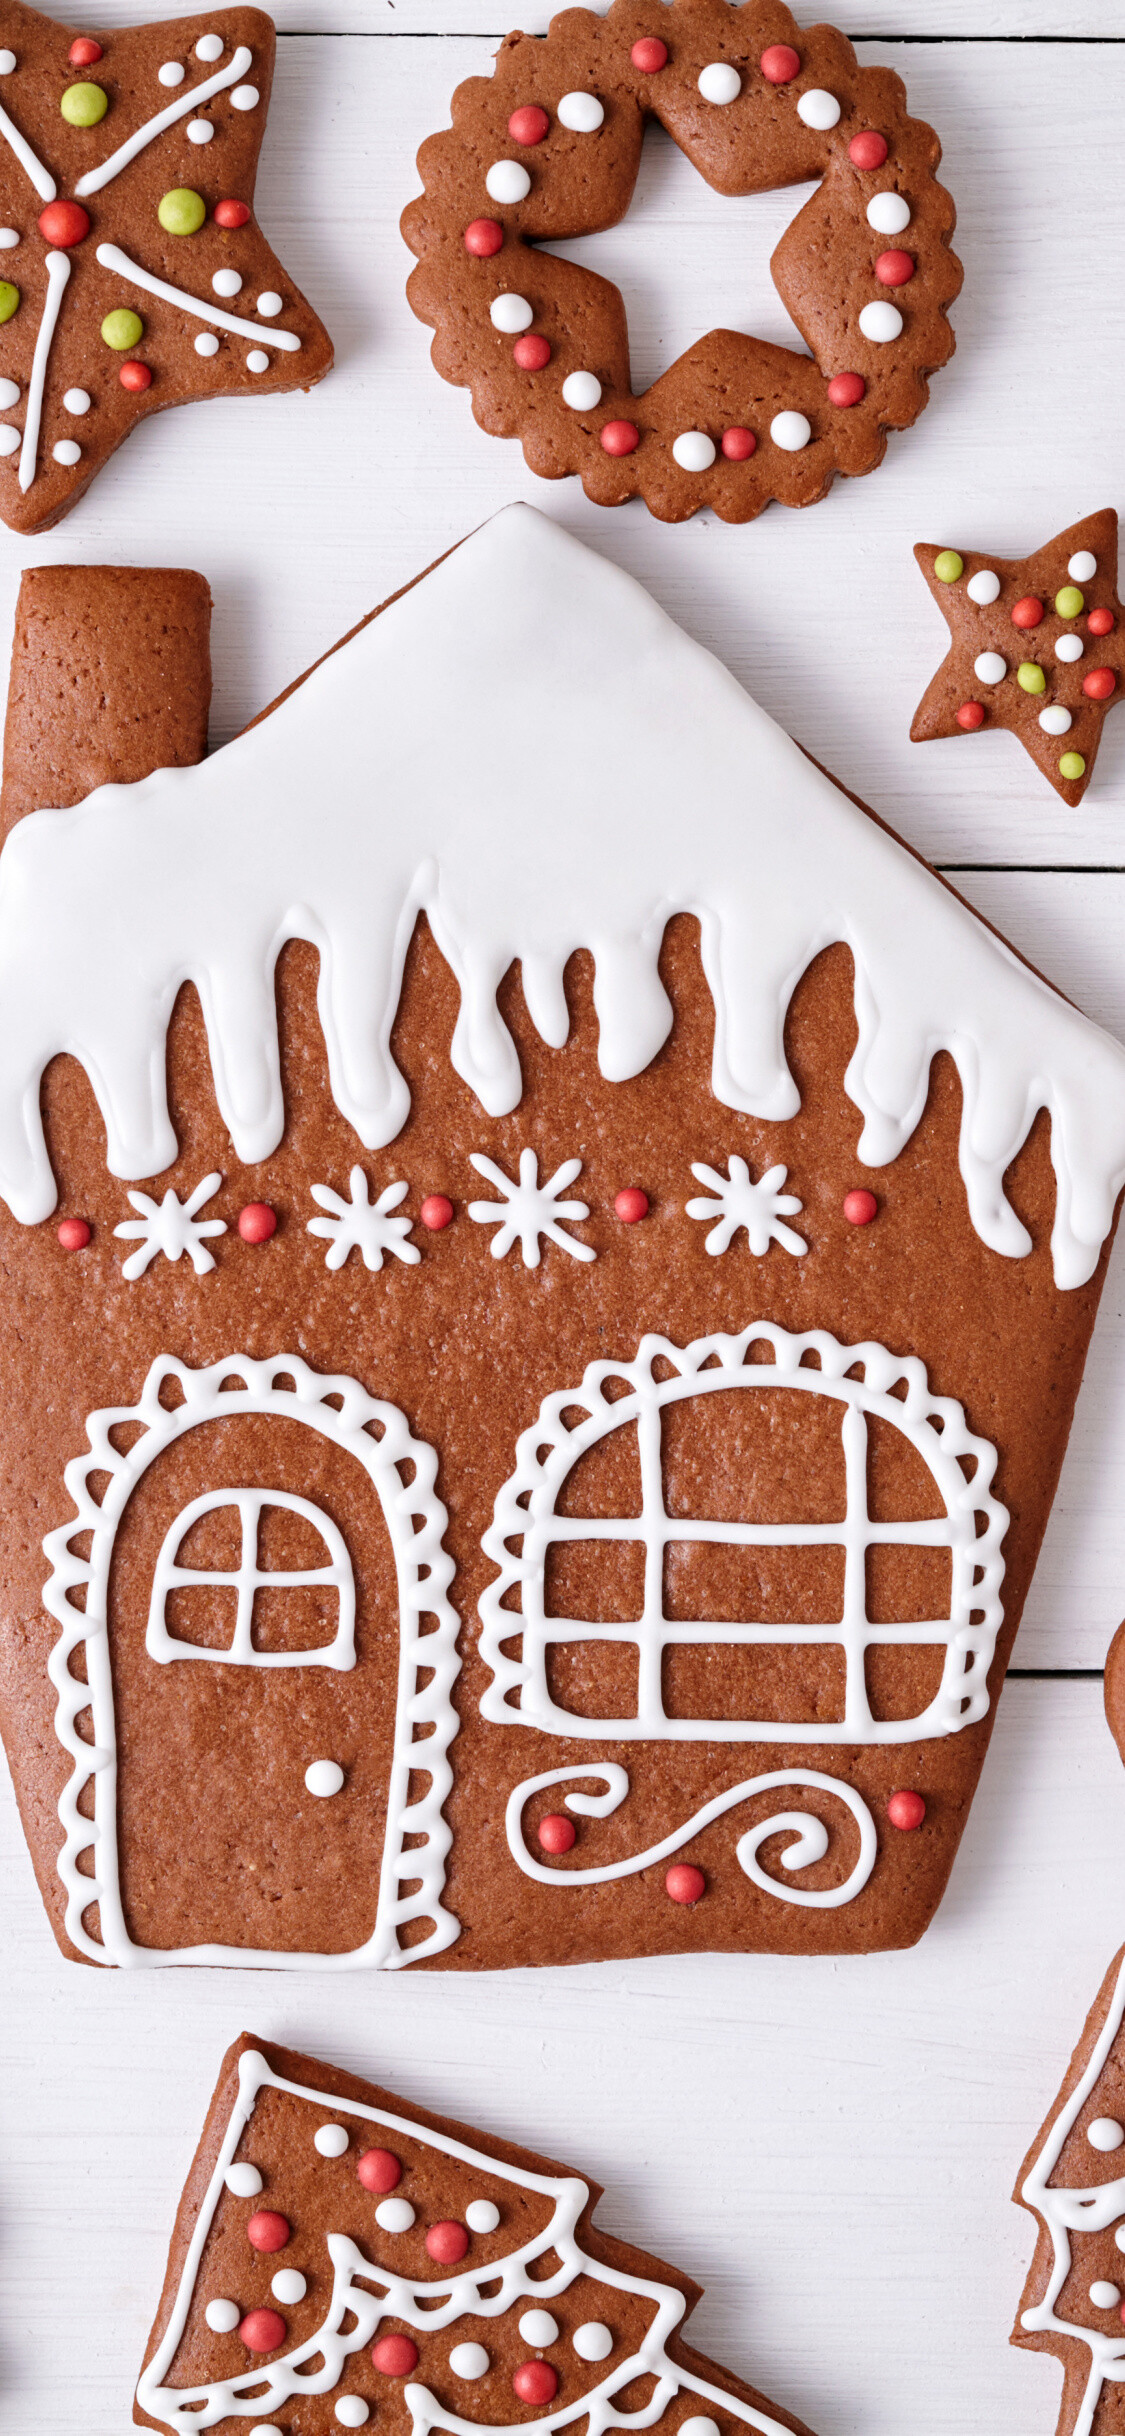 Gingerbread House: Mouthwatering gingersnap cookies, Sprinkles, Confectionery decoration. 1130x2440 HD Wallpaper.